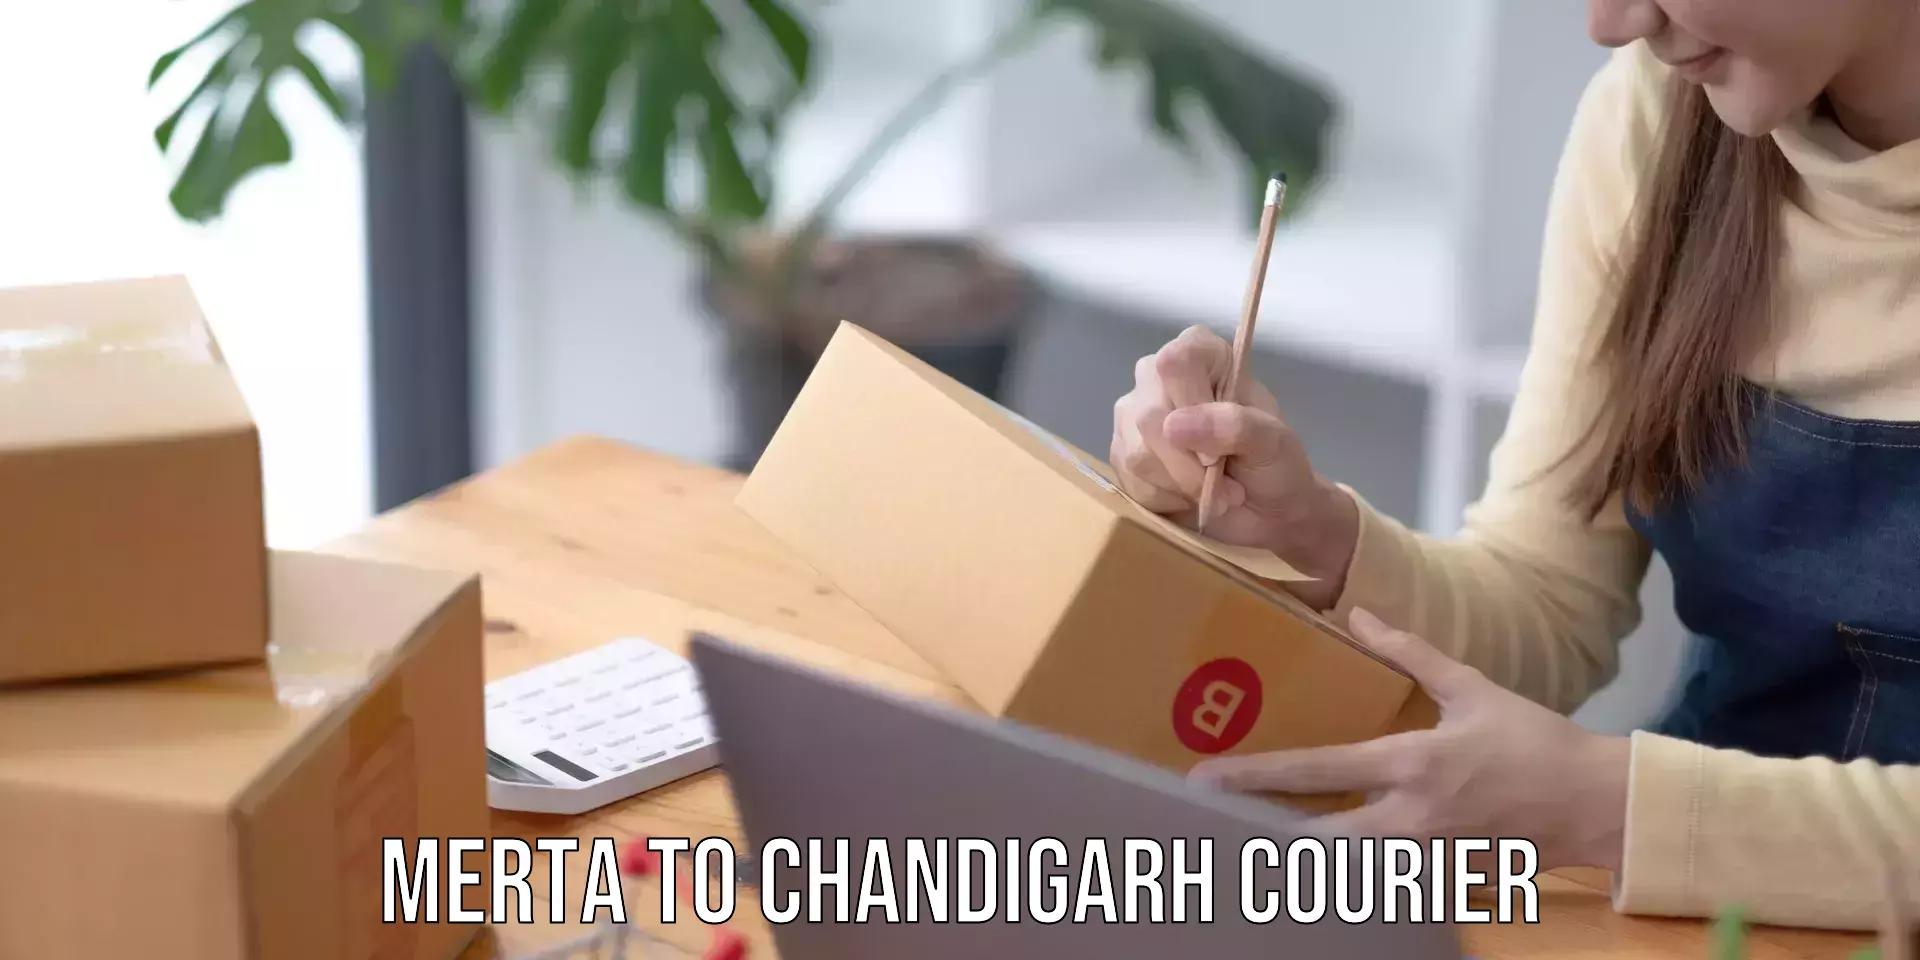 Same-day delivery options Merta to Chandigarh